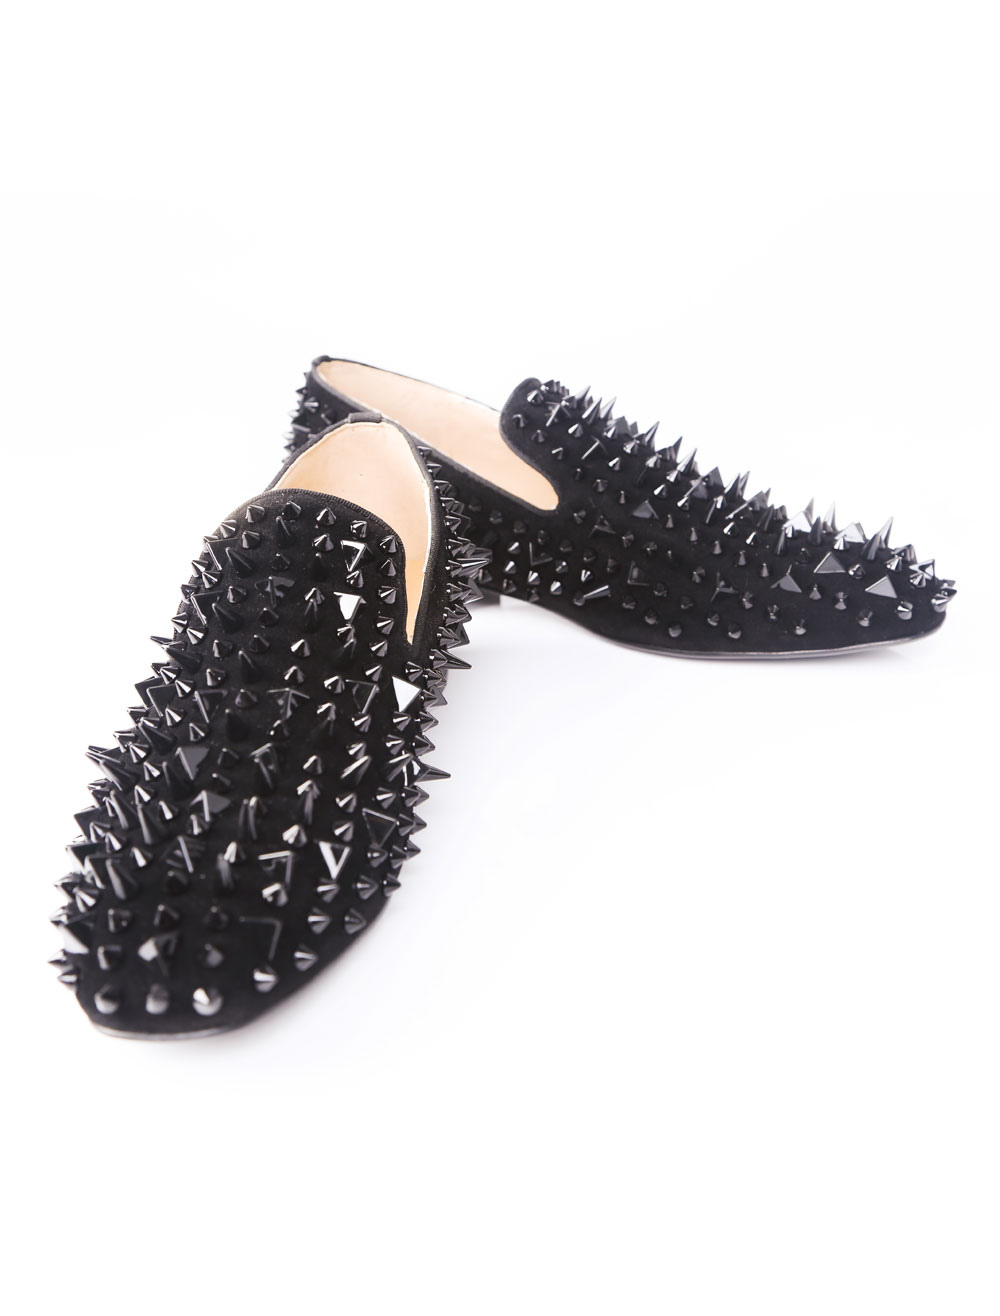 Mens Black Spike Loafers Prom Shoes 